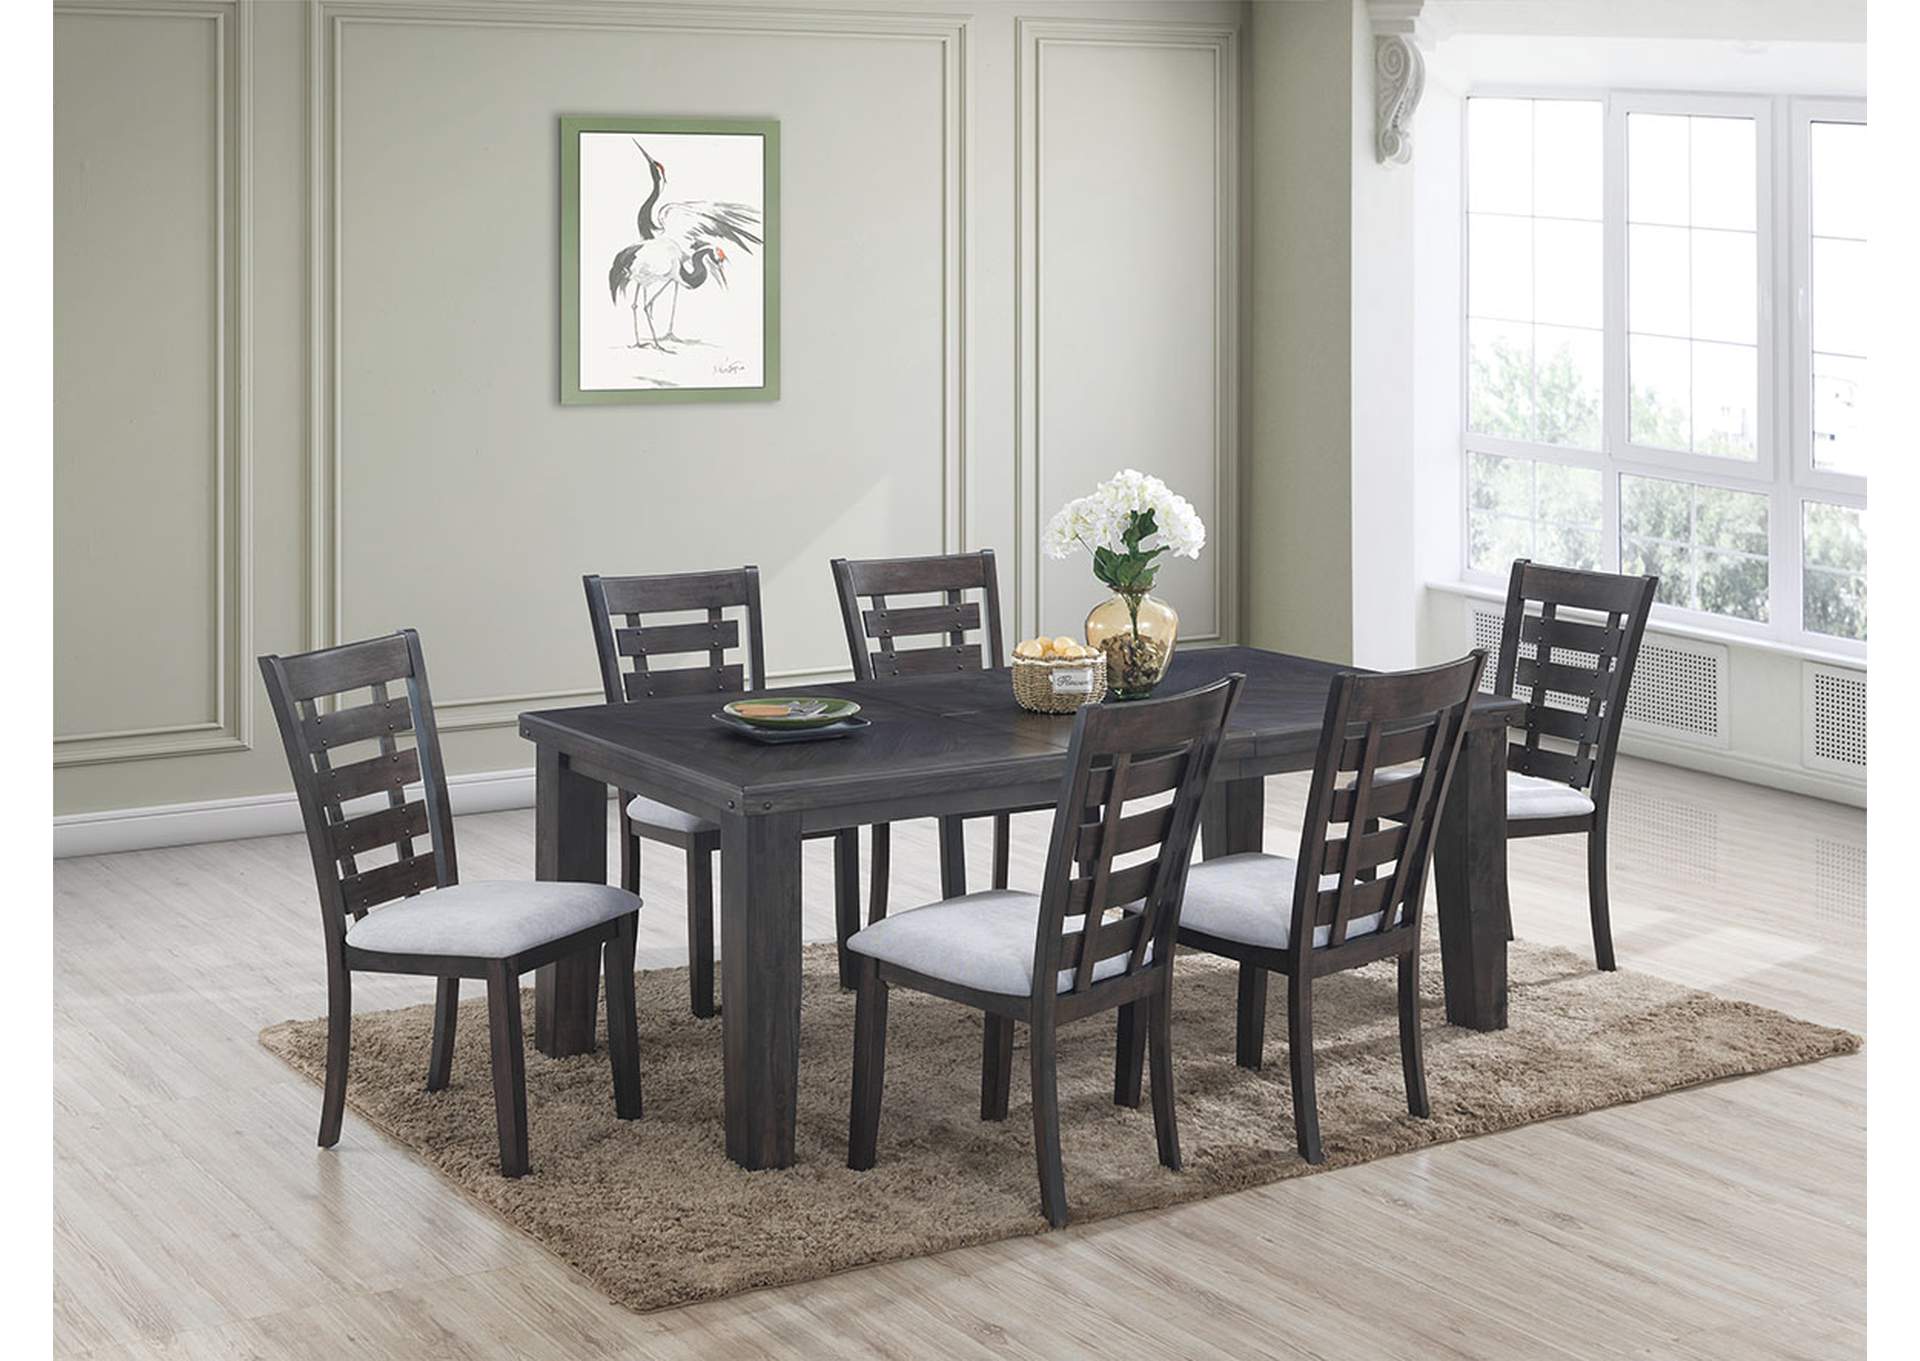 Bailey Gray 7 Piece Dining Set -Table W/ 6 Side Chairs,Cosmos Furniture